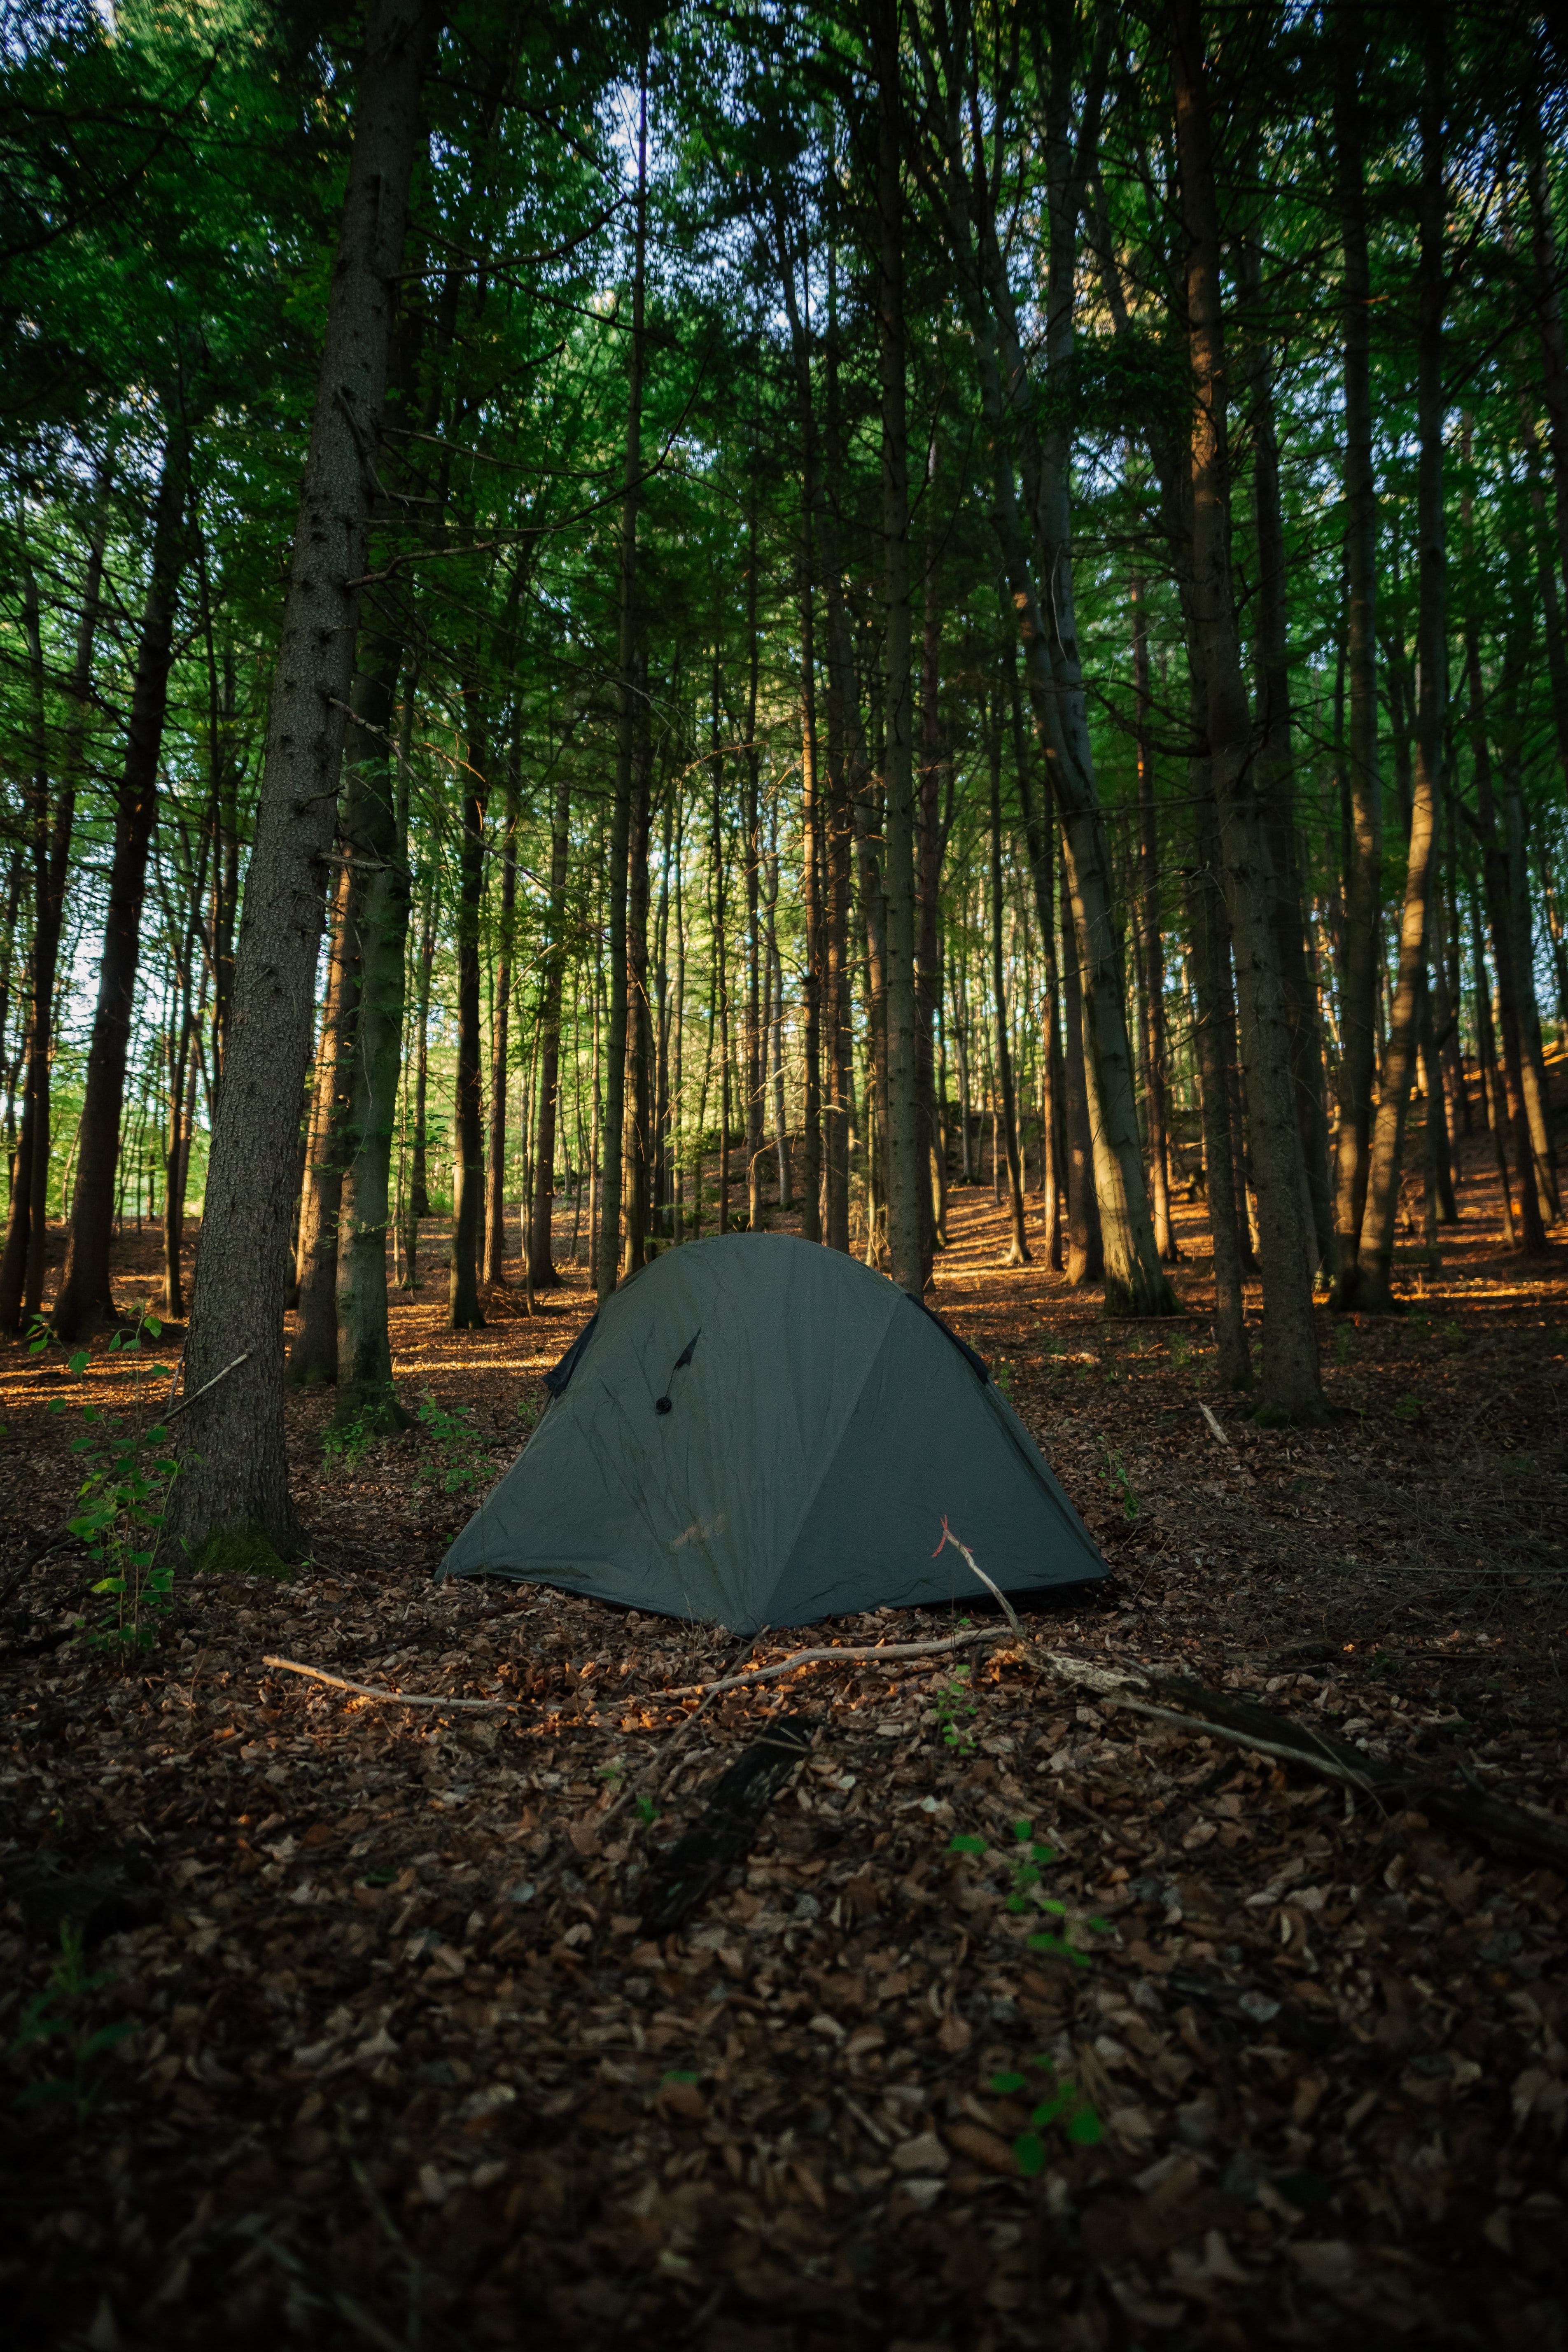 camping, miscellanea, tent, trees, miscellaneous, forest, campsite